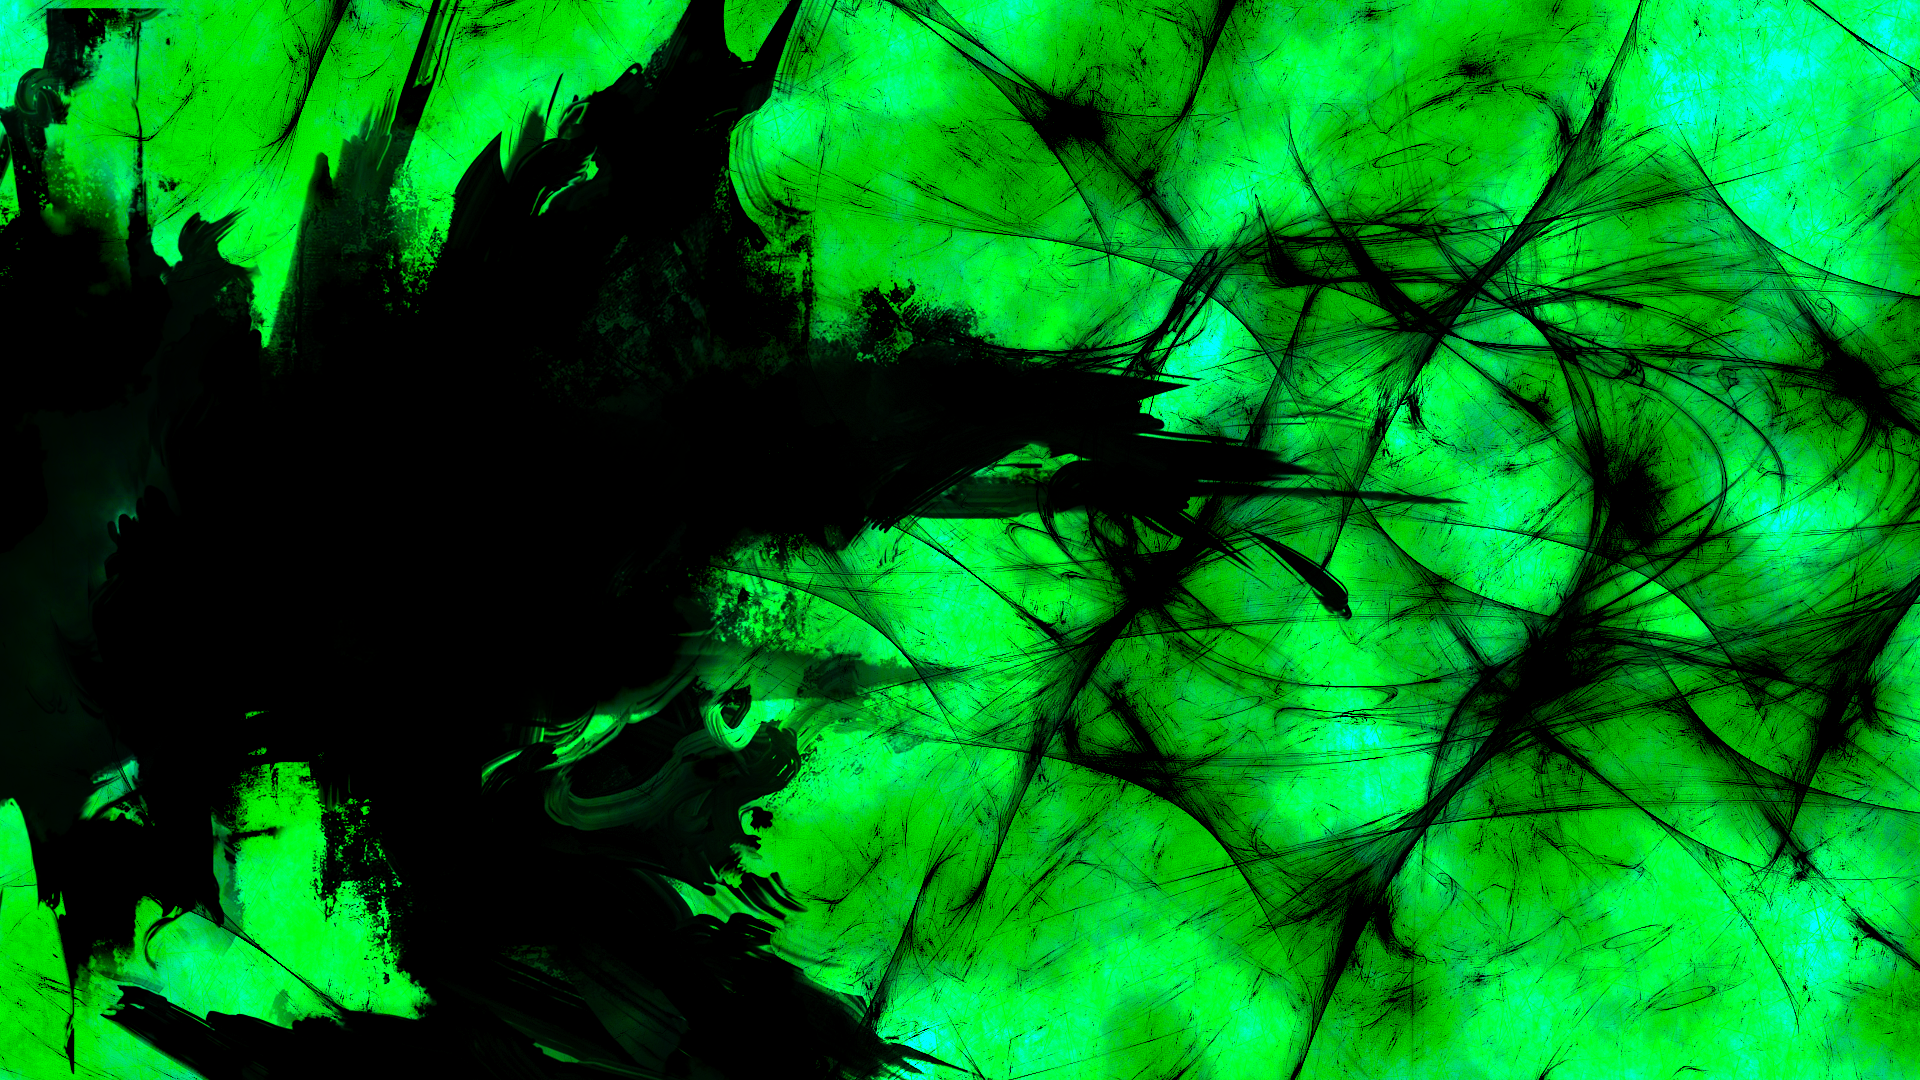 Free Download Green Abstract Wallpaper By Br8y16 [1920x1080] For Your Desktop Mobile And Tablet